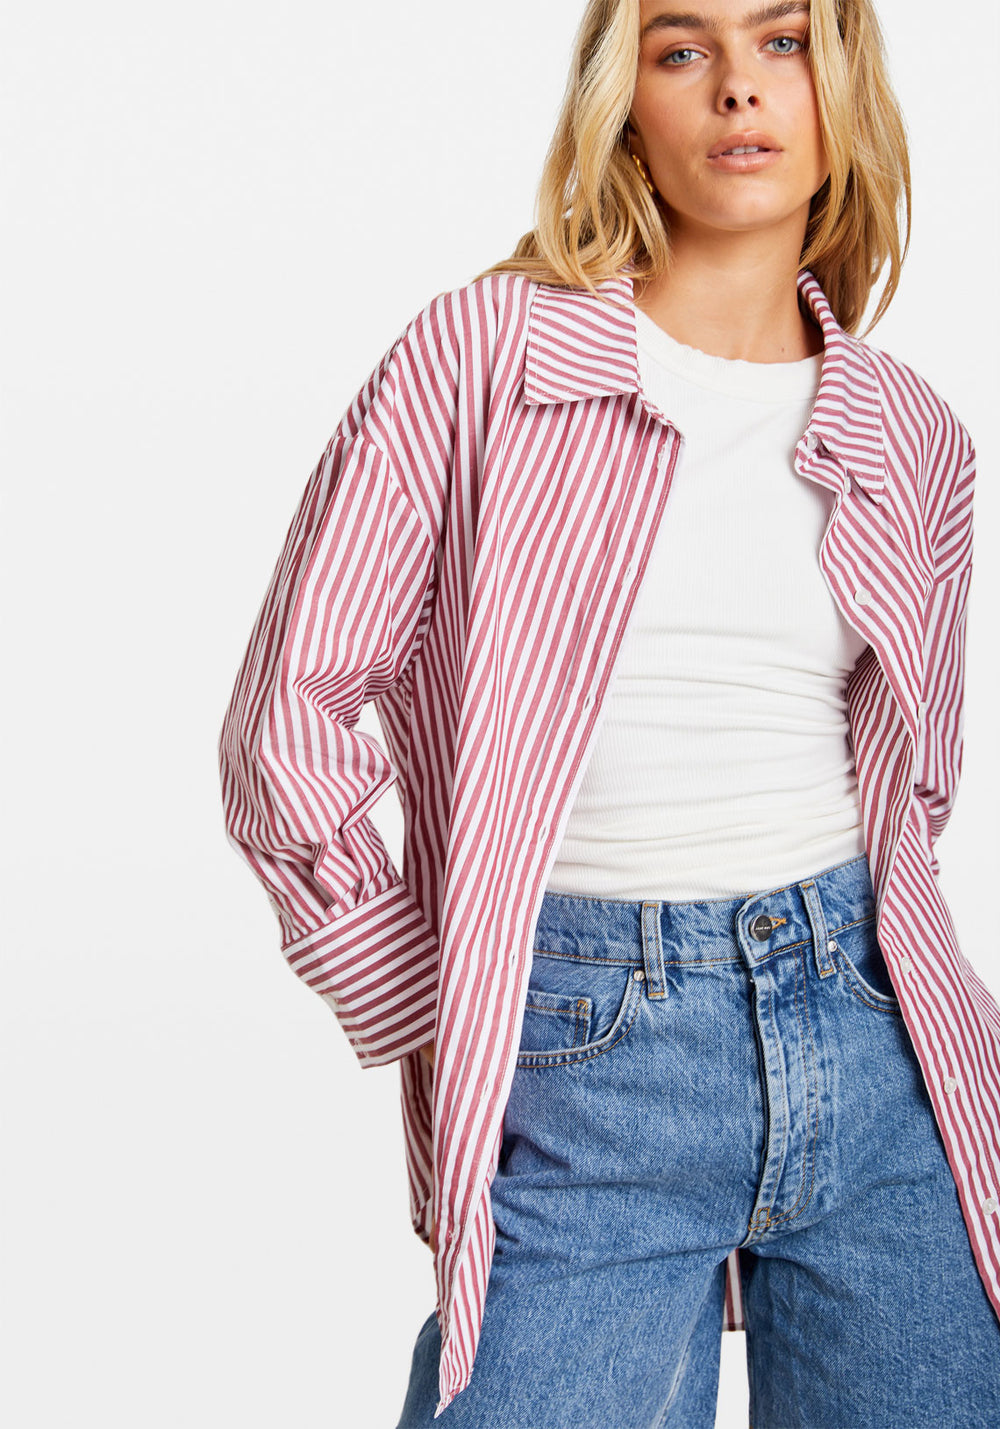 Anine Bing Mika Shirt in White And Lavender Stripe - ShopStyle Tops